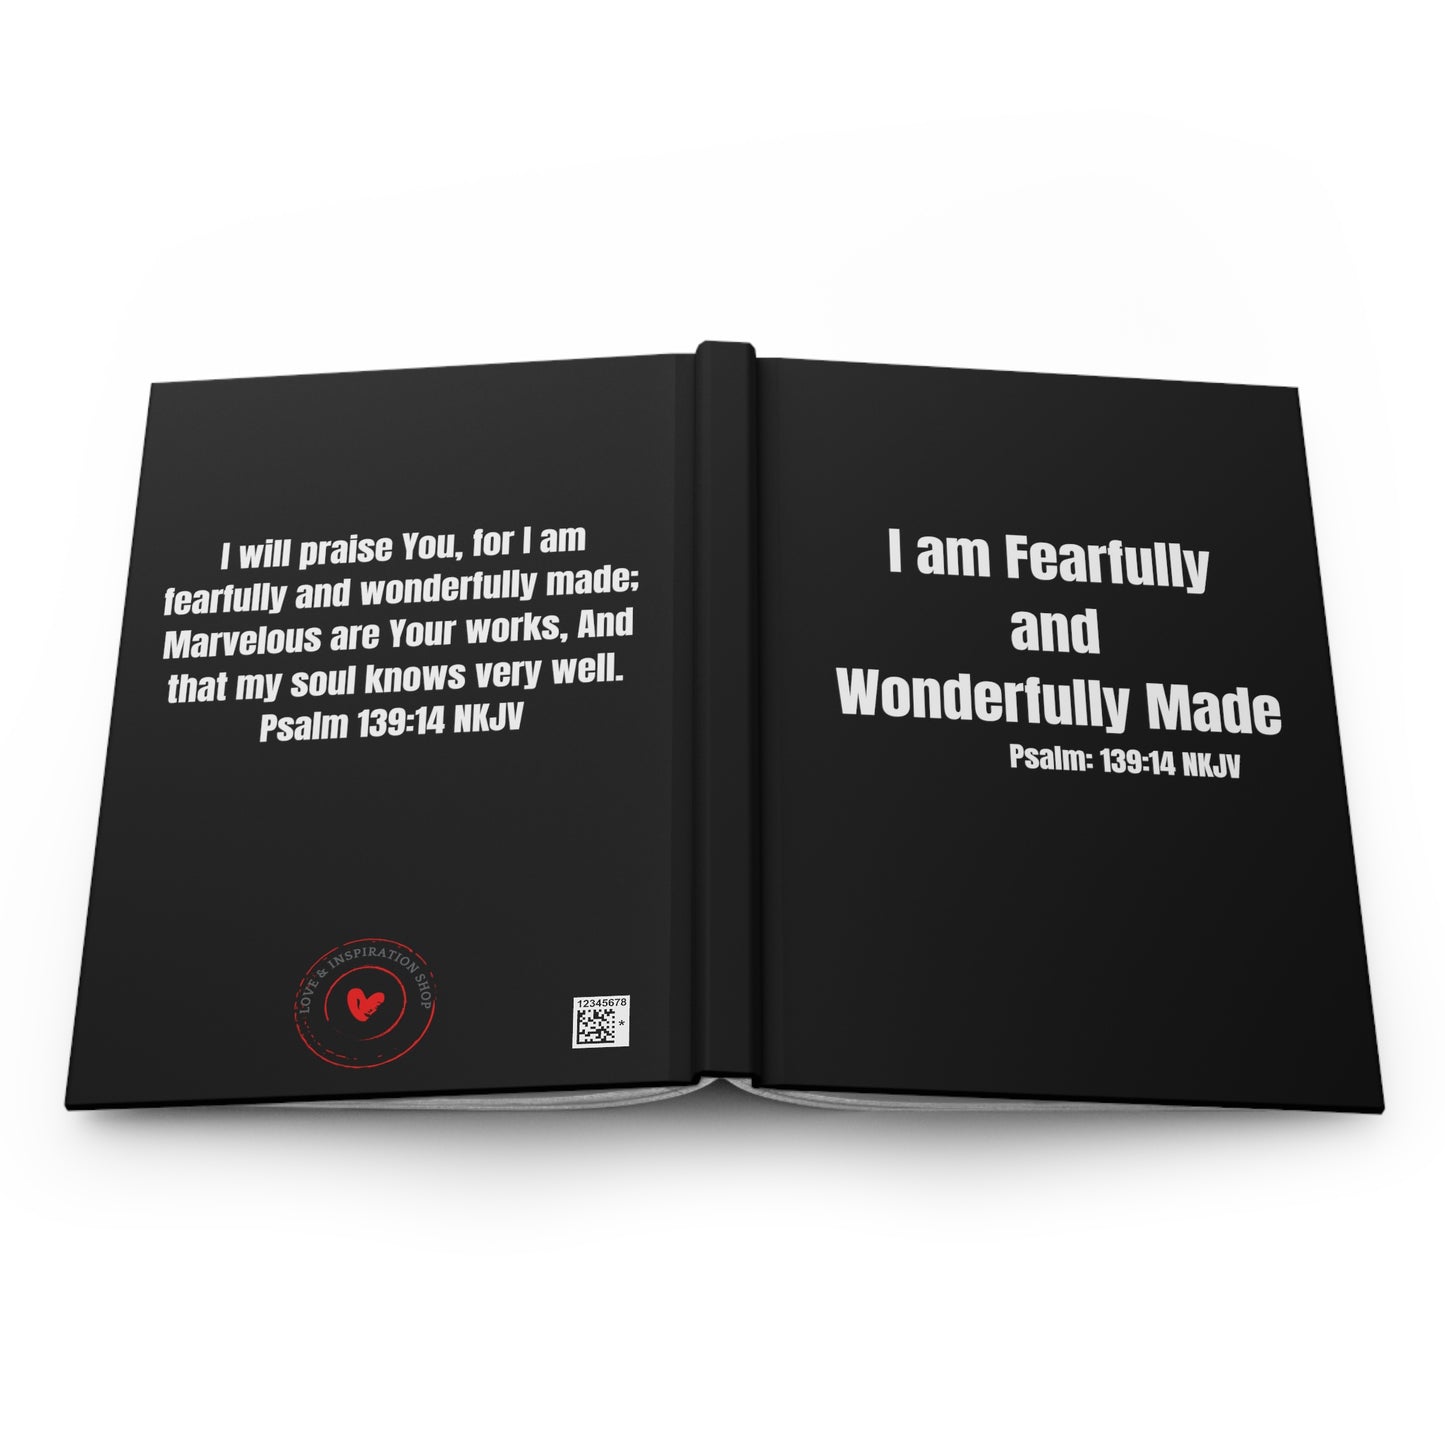 "I am Fearfully and Wonderfully Made" Psalm 139:14 (NKJV) Hardcover Matte Journal